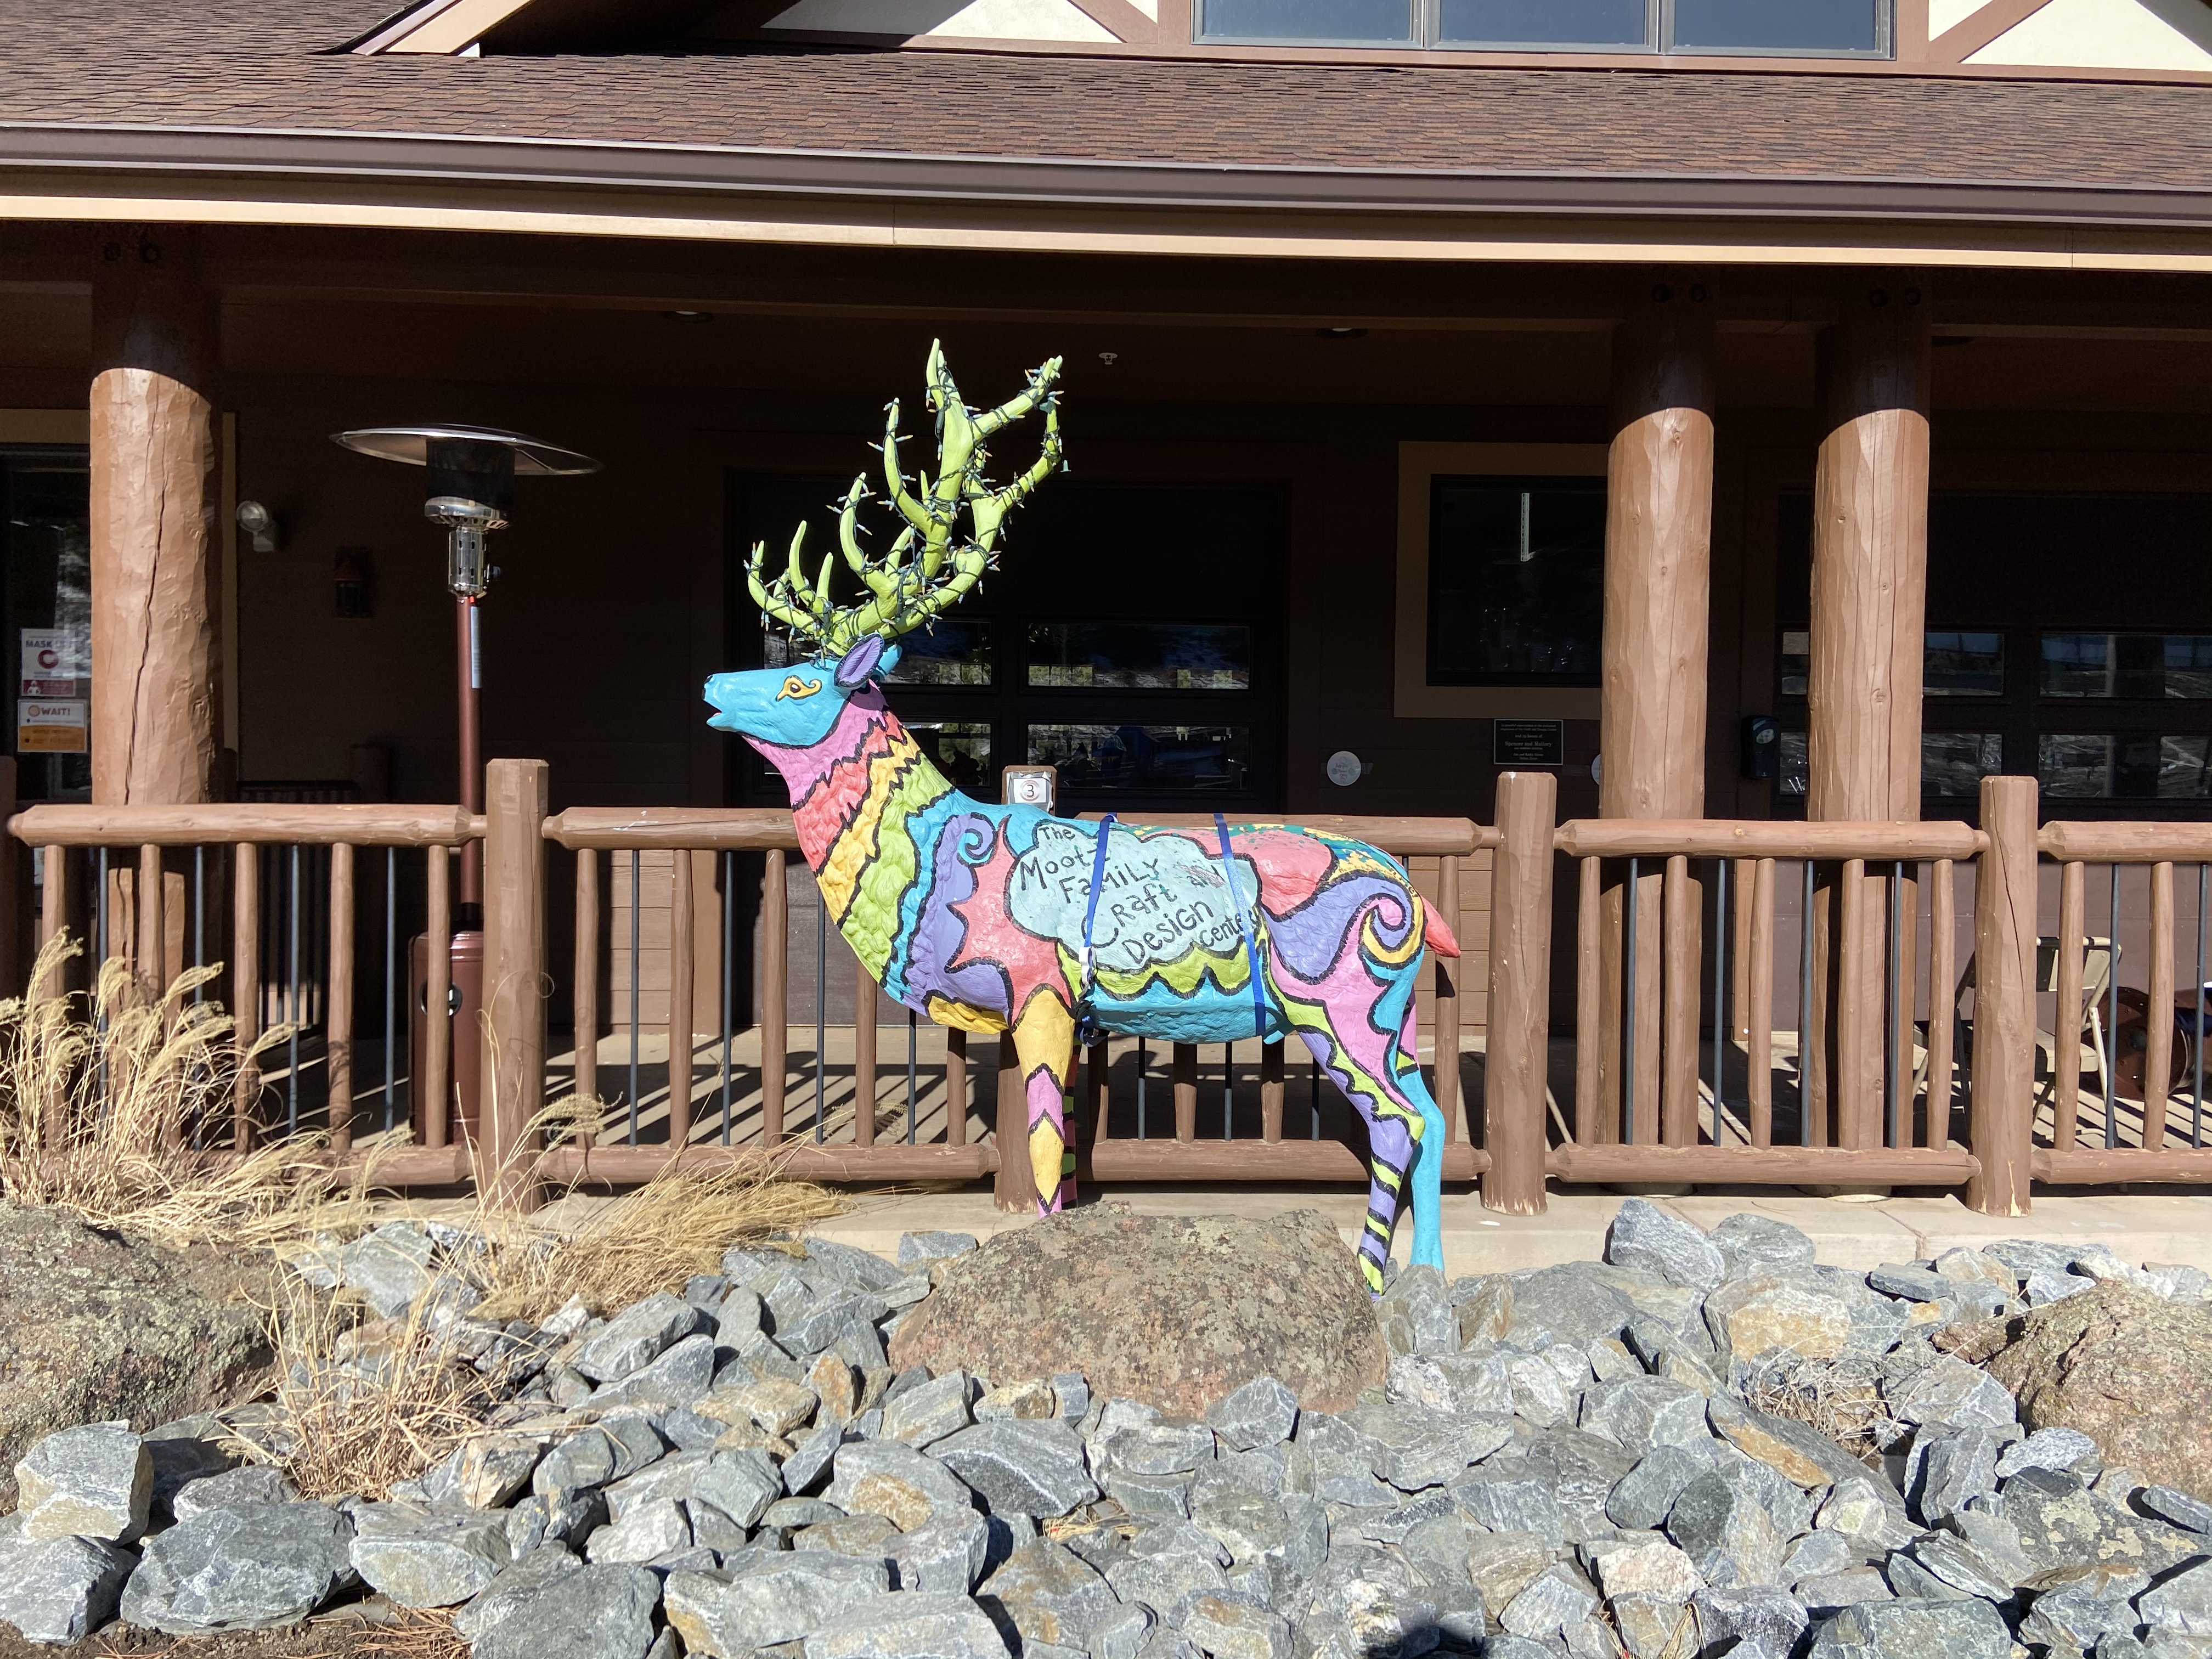 This sculpture of a male elk is painted in various stripes and swirls of bright blue, pink, red, yellow, lime green, and purple. His antlers are lime green and wrapped with lights.